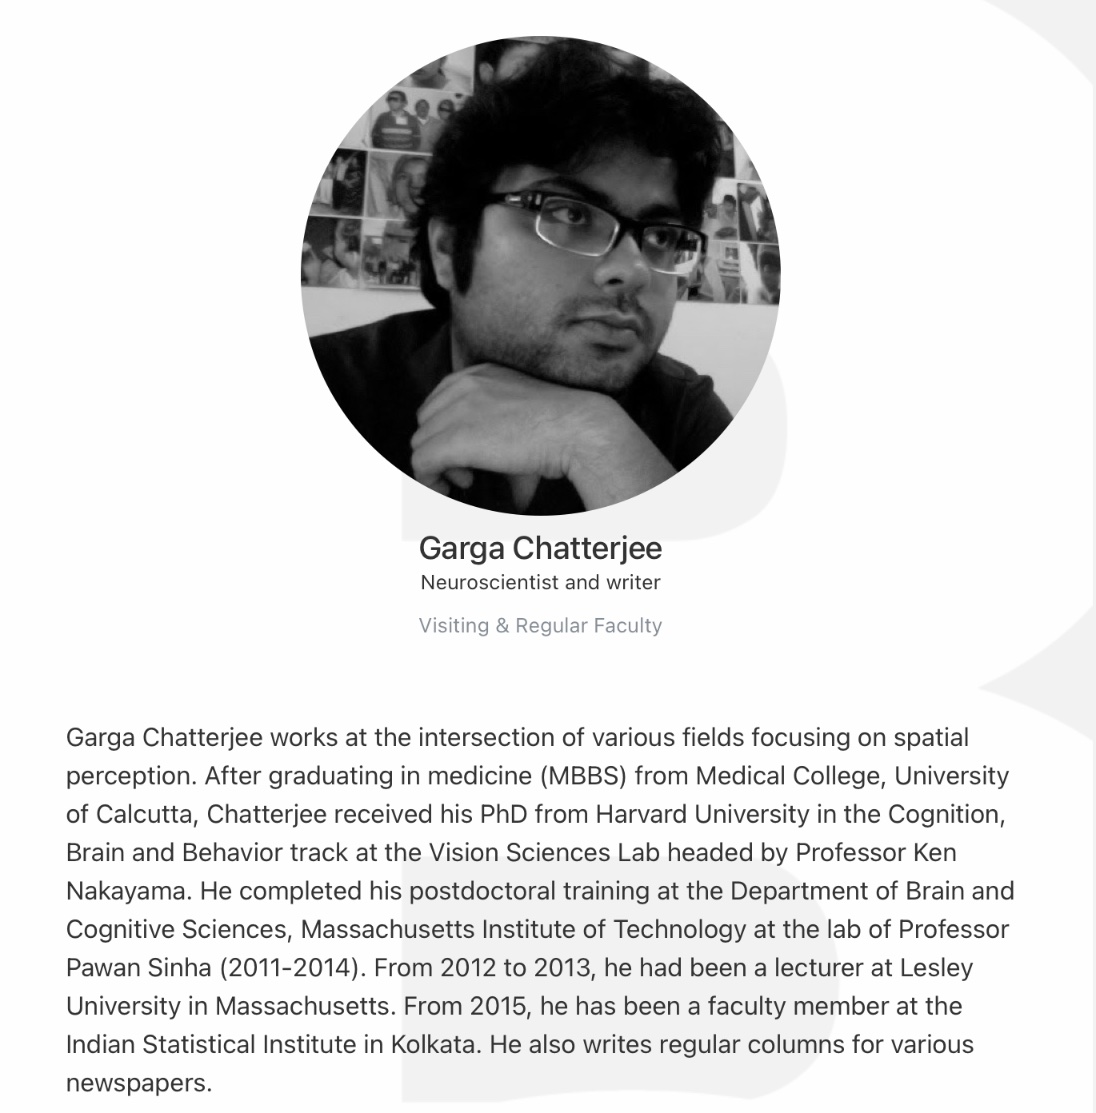 I had no idea that @GargaC ’s game was this strong.
He is a Harvard-MIT trained neuroscientist with specialisation in cognition & behaviour tracking. Feels good to have an intellectual heavyweight like him on the regionalist side.